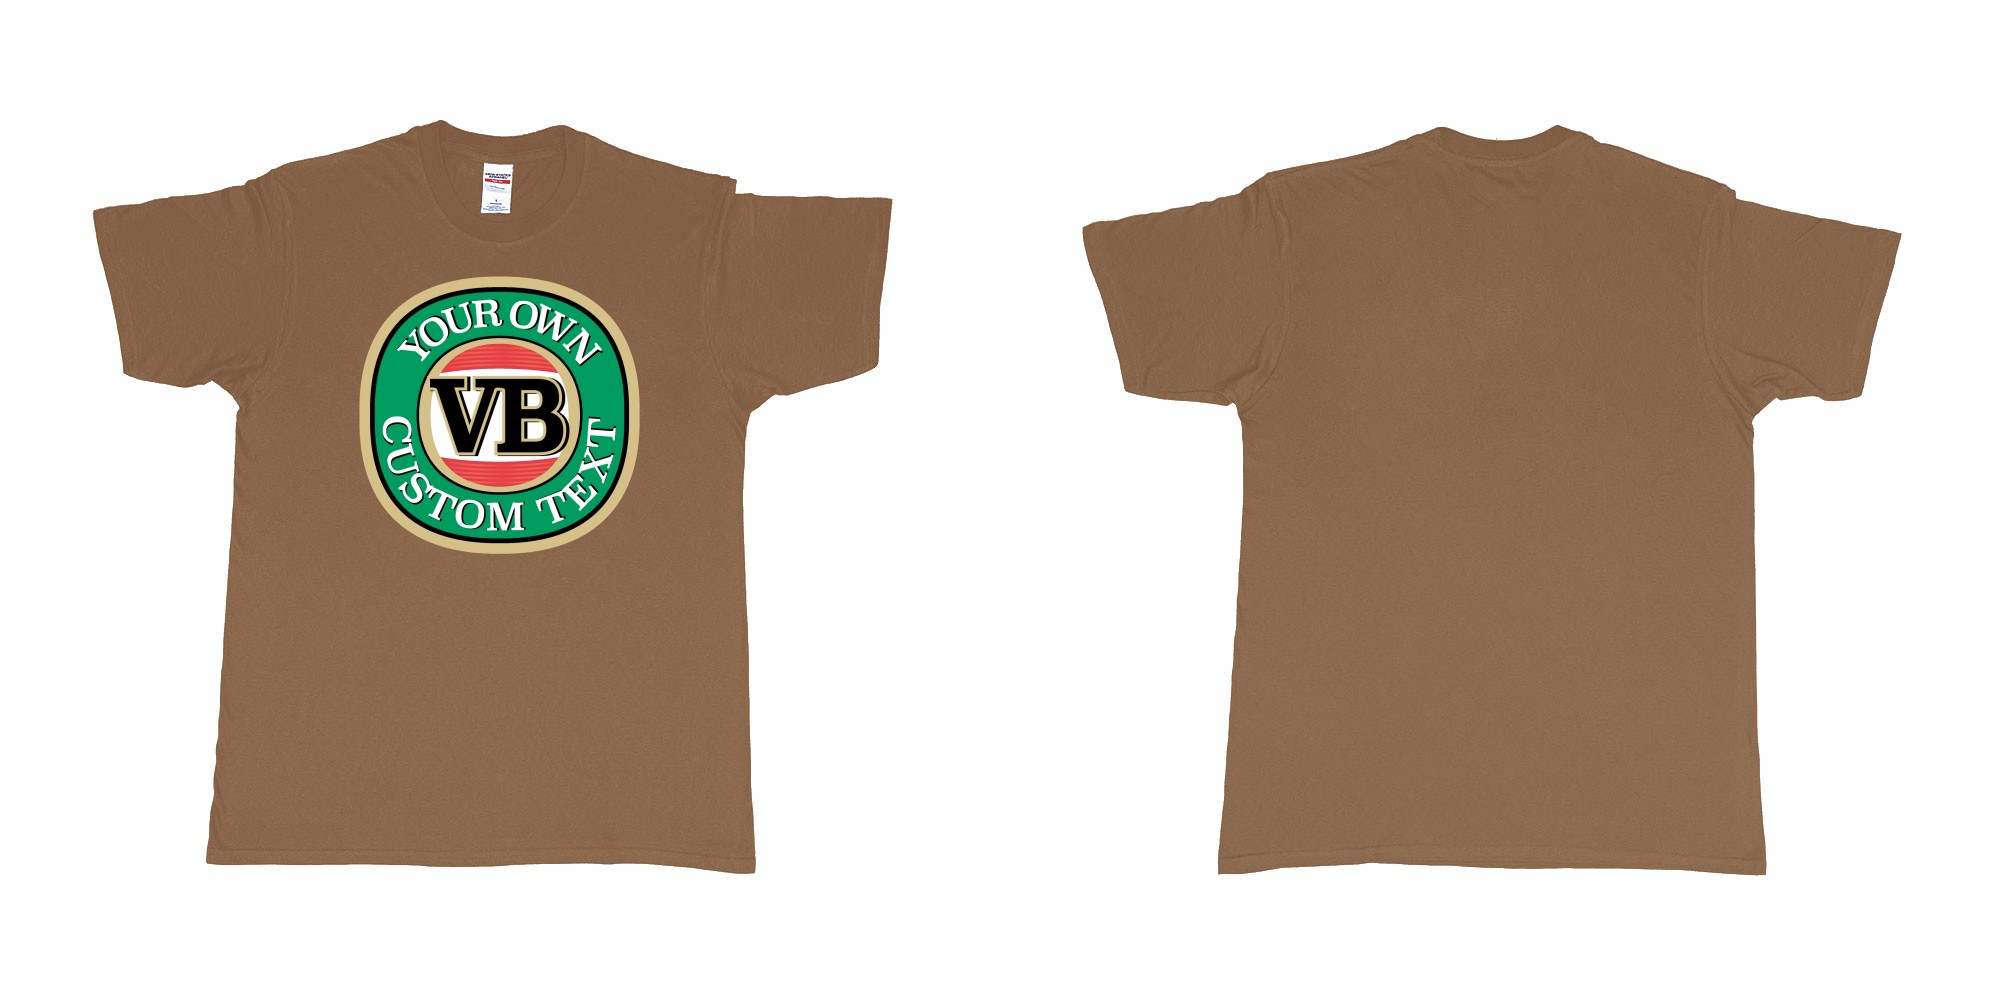 Custom tshirt design vb victoria bitter beer brand logo in fabric color chestnut choice your own text made in Bali by The Pirate Way